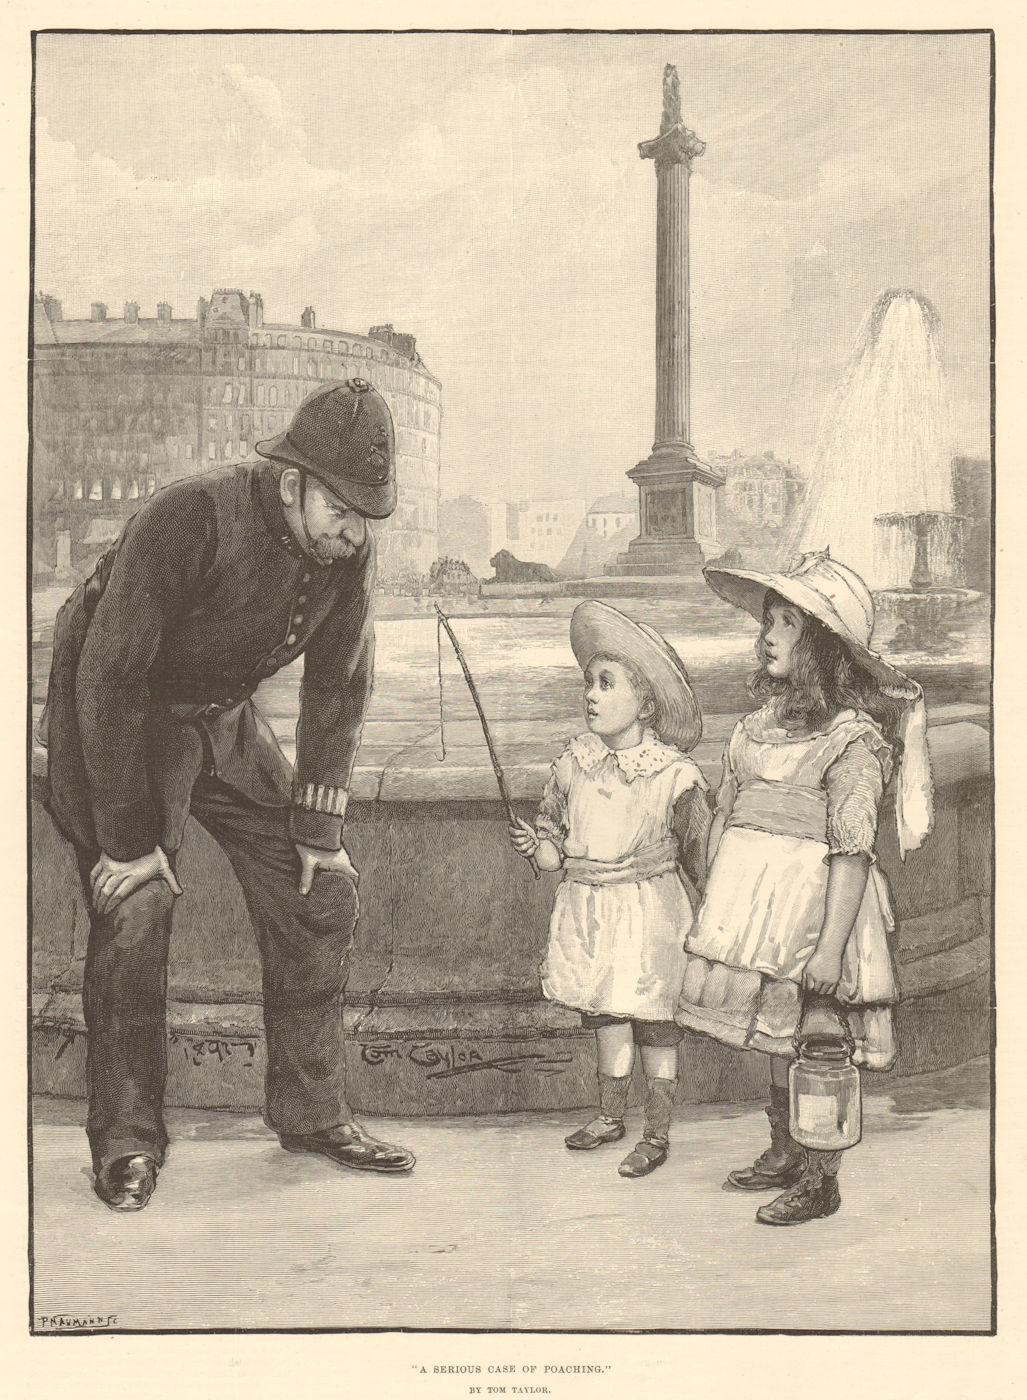 Associate Product A serious case of poaching, by Tom Taylor. Trafalgar Square Children Police 1891